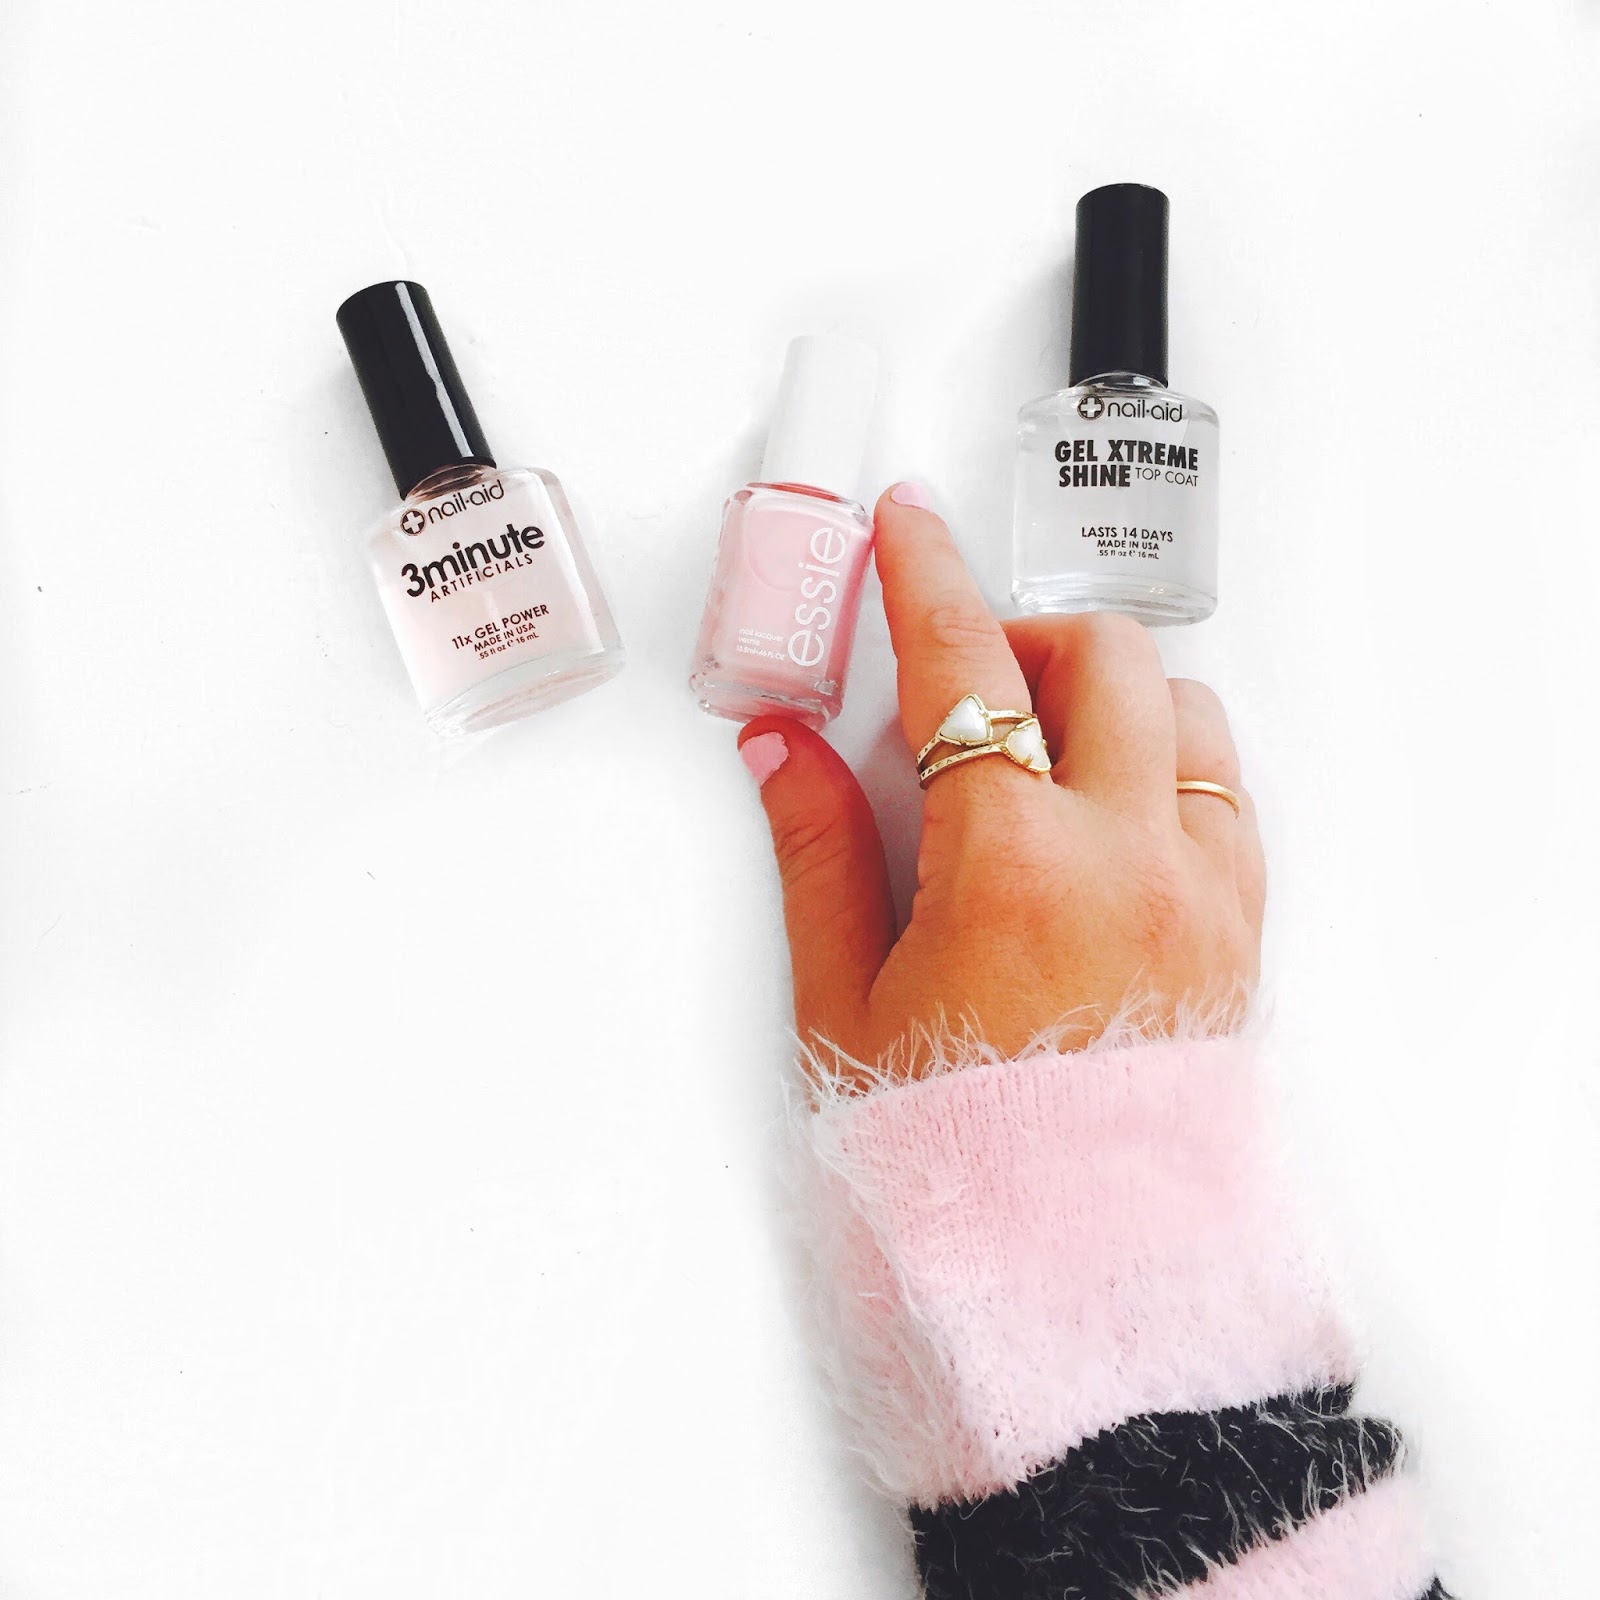 3 steps to gel nails at home